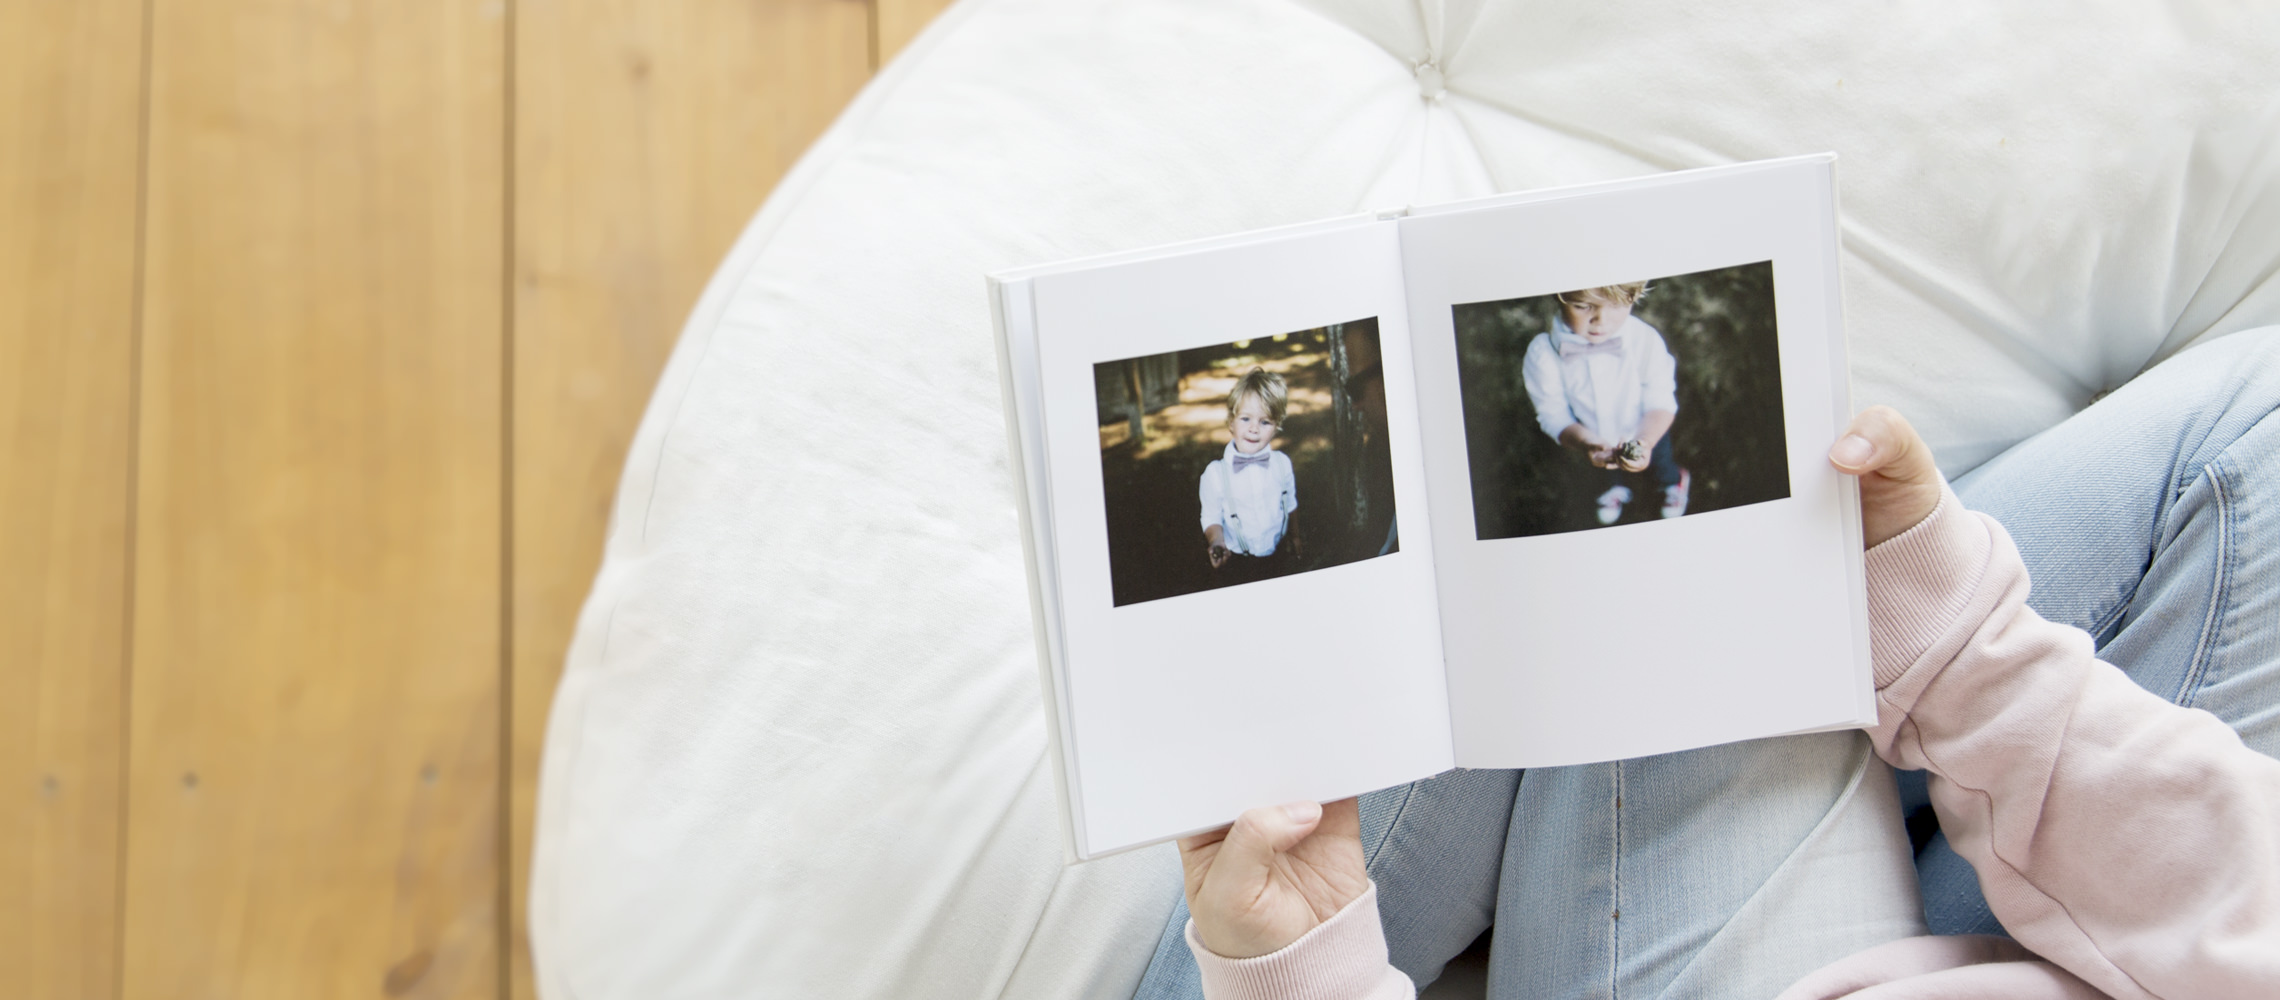 Person on a bean bag flipping through a photo book with images of a young boy.